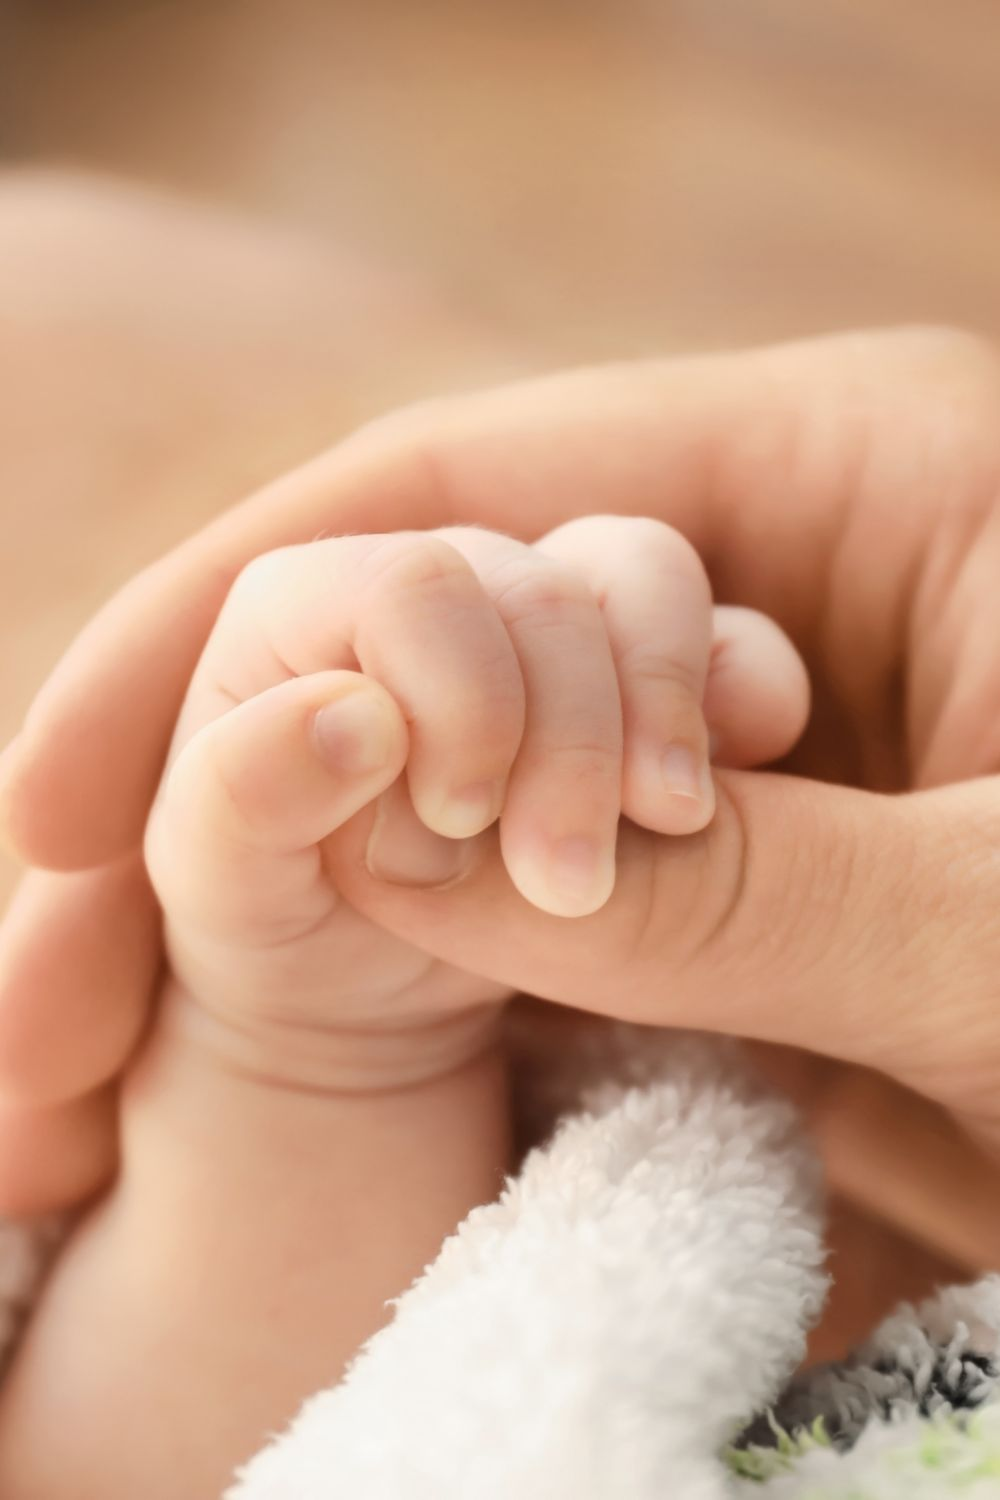 Newborn nails - Keeping your newboirns nails short is the best way to prevent scratches